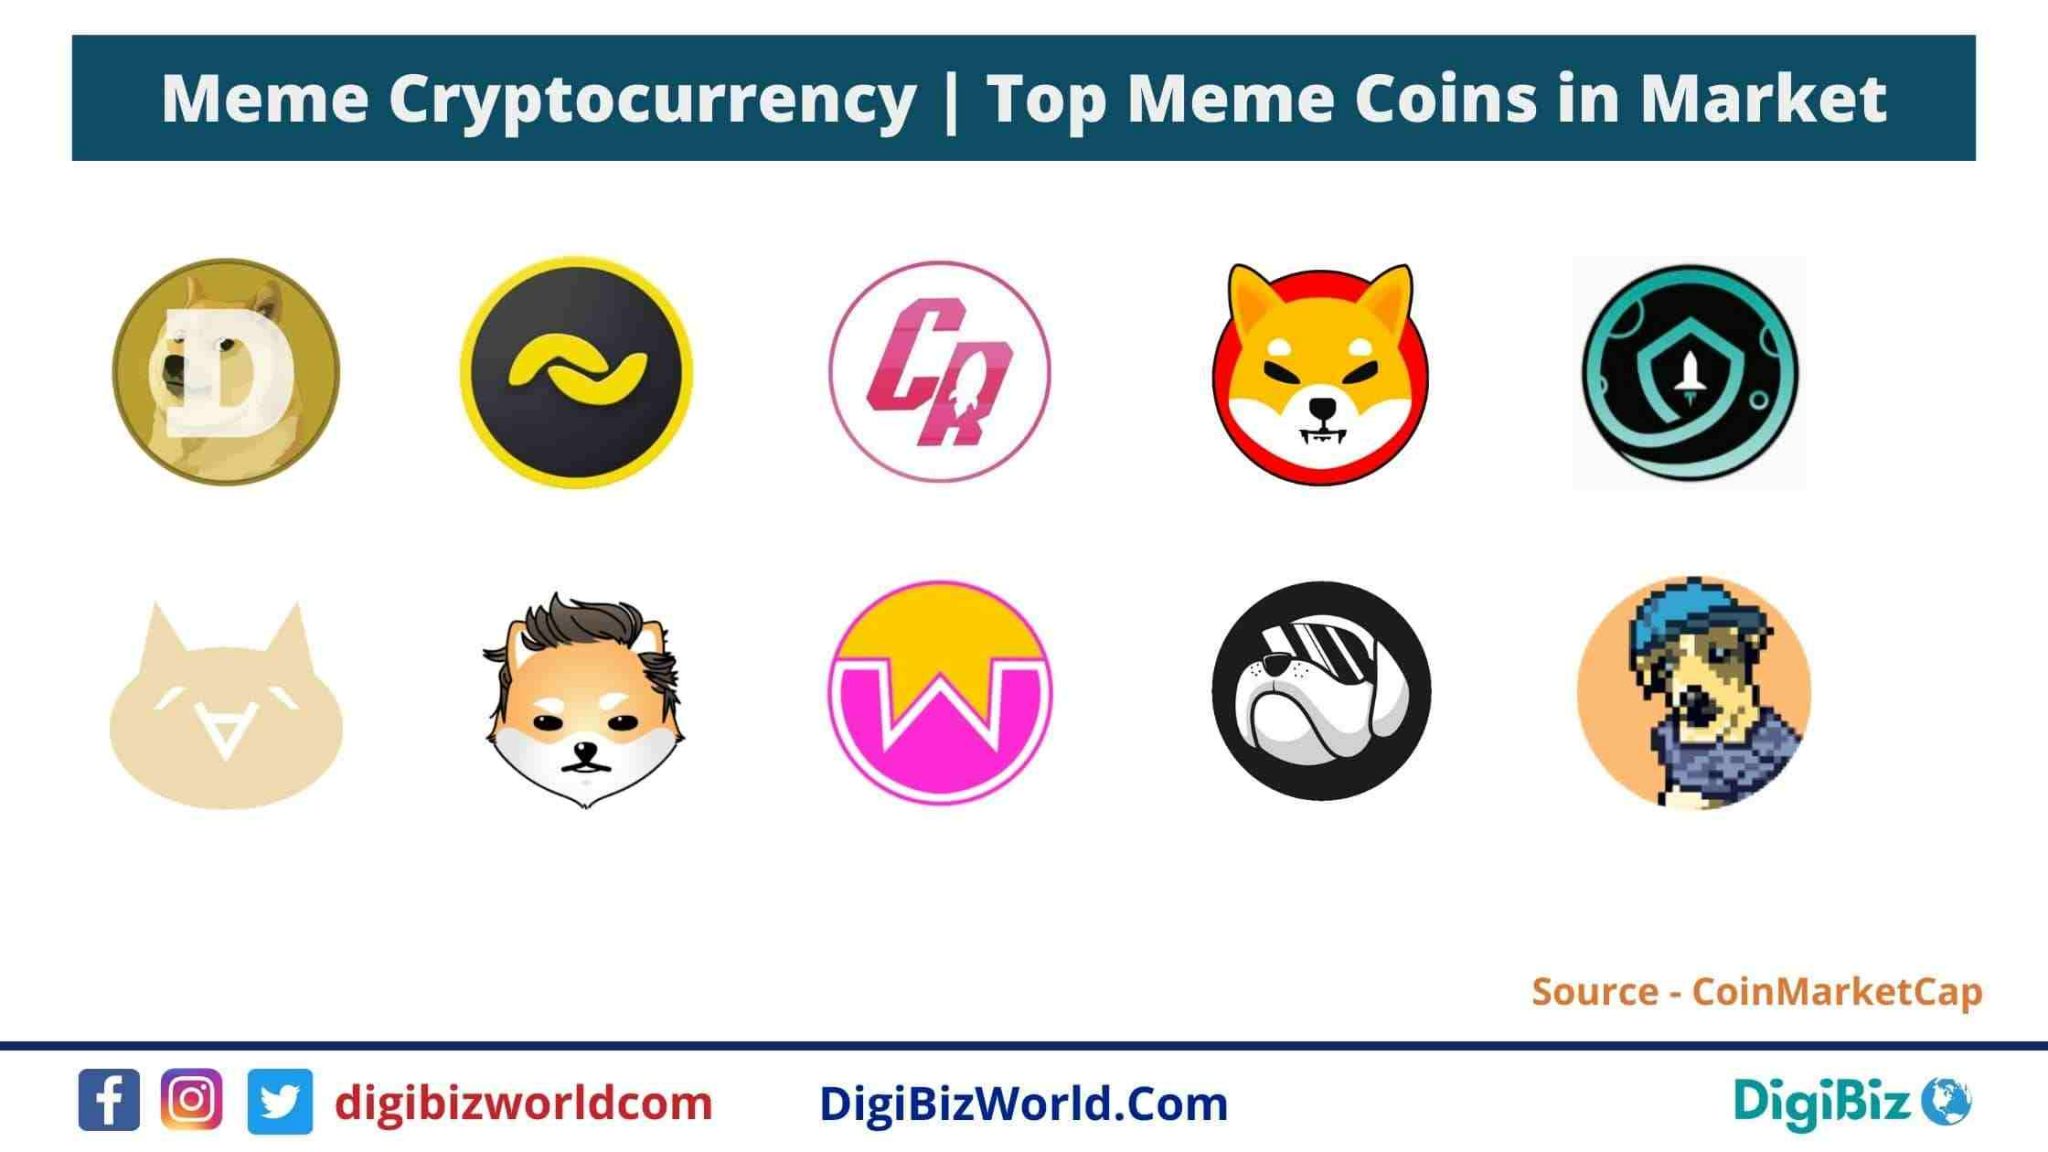 Meme Cryptocurrency | Best Meme Coins and Tokens by Market ...